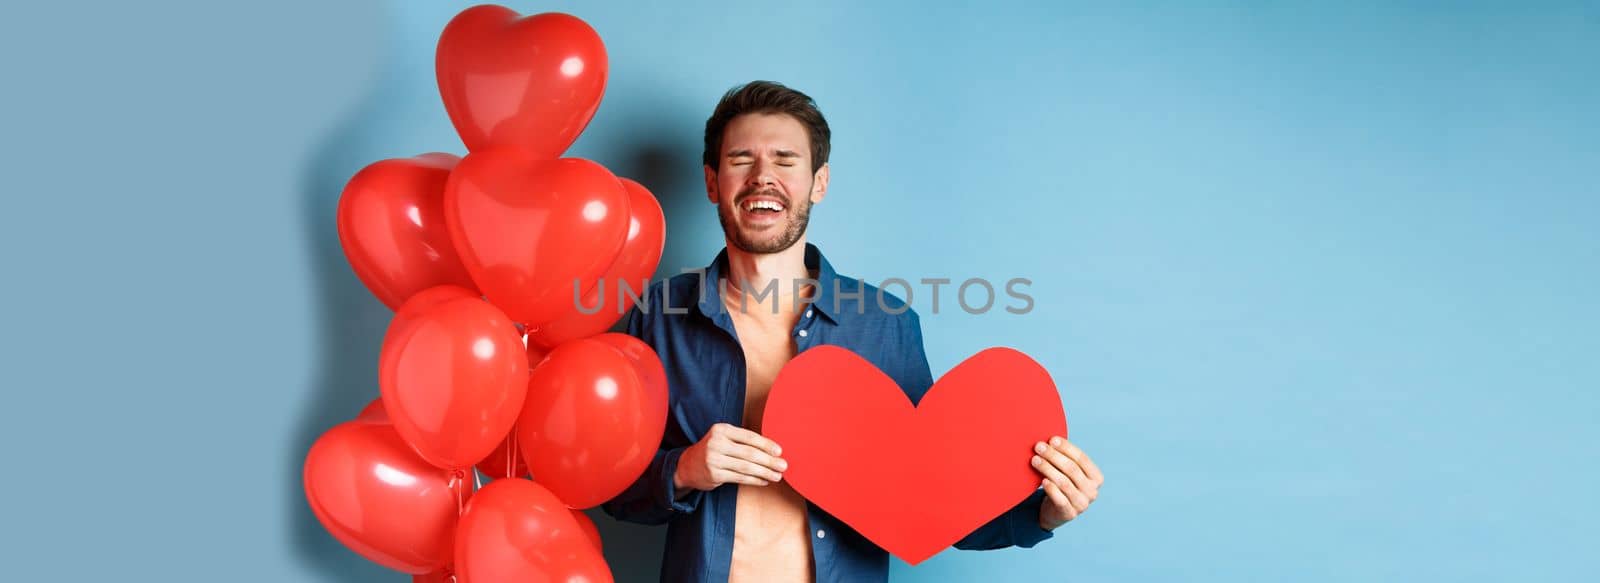 Heartbroken man crying of breakup of valentines day, holding red heart cutout and standing near romantic balloons over blue background.